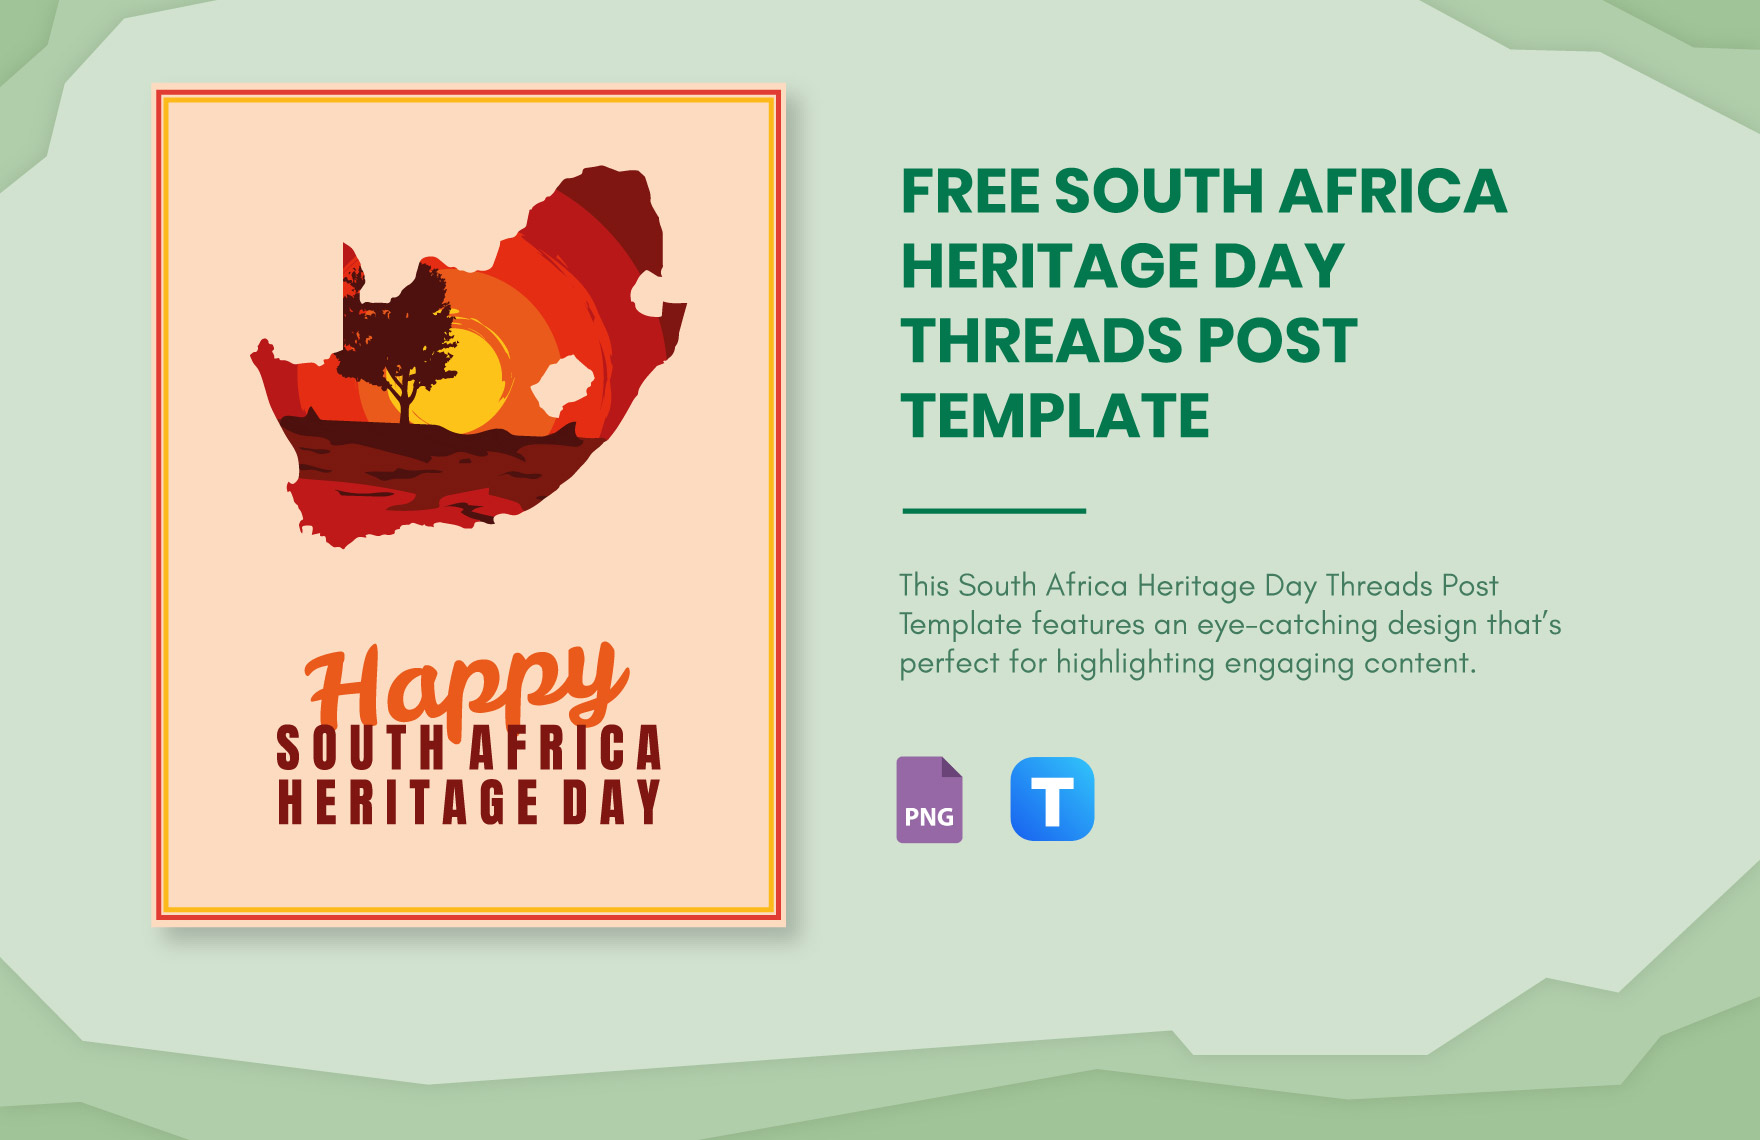 South Africa Heritage Day Threads Post Template